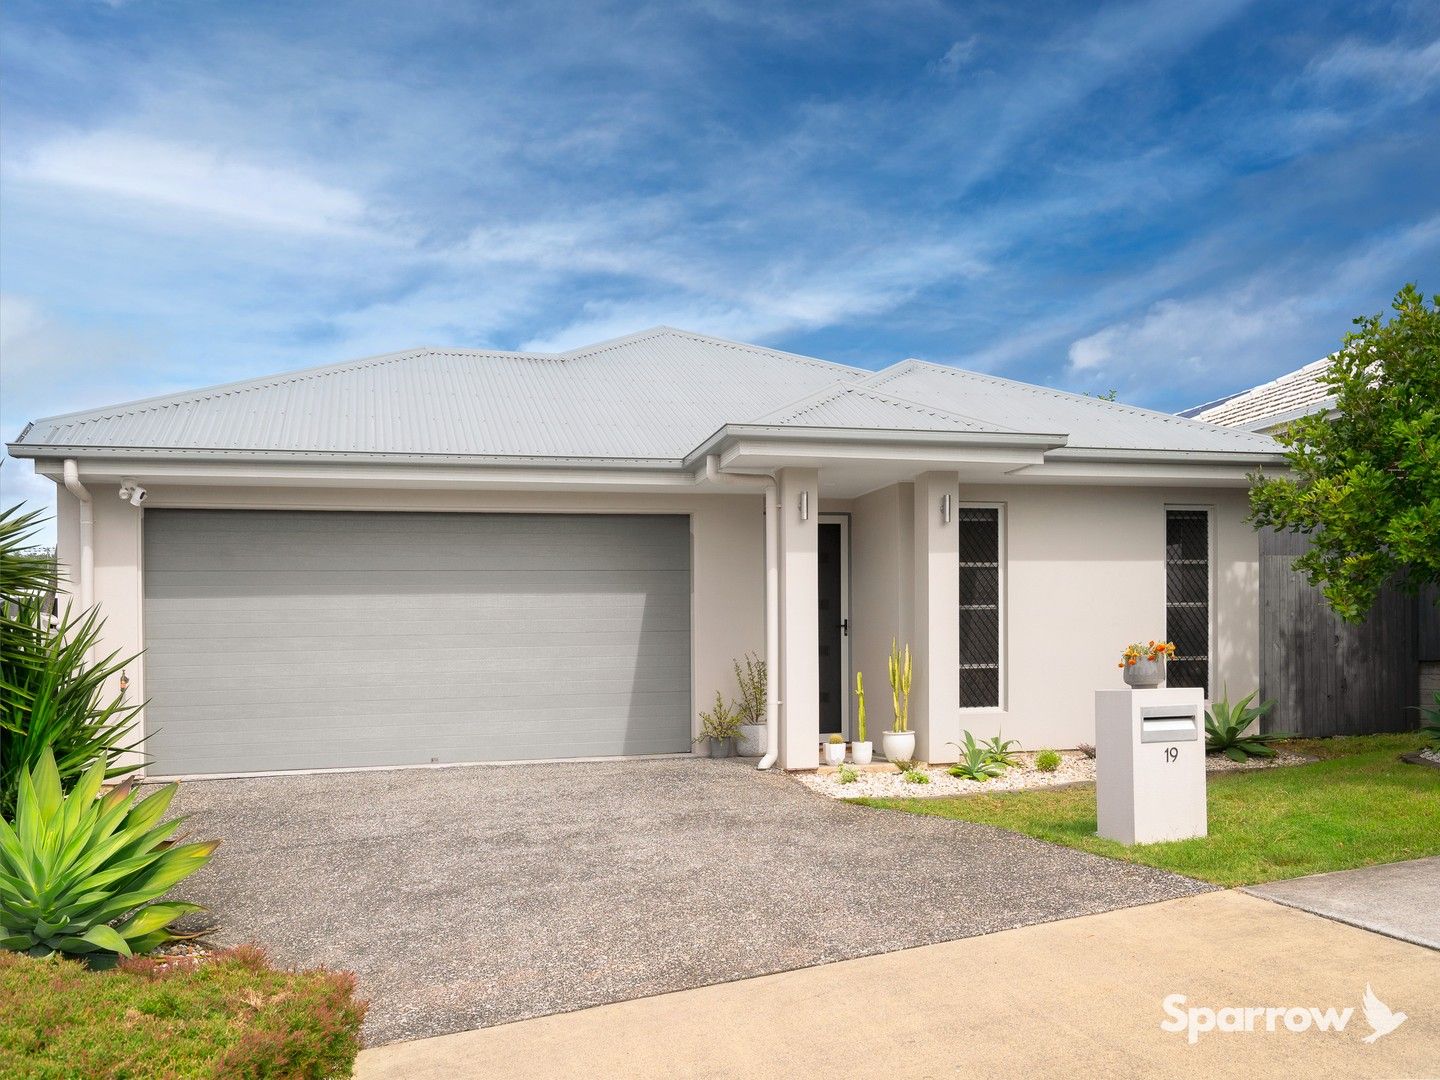 4 bedrooms House in 19 Rosella Drive BAHRS SCRUB QLD, 4207